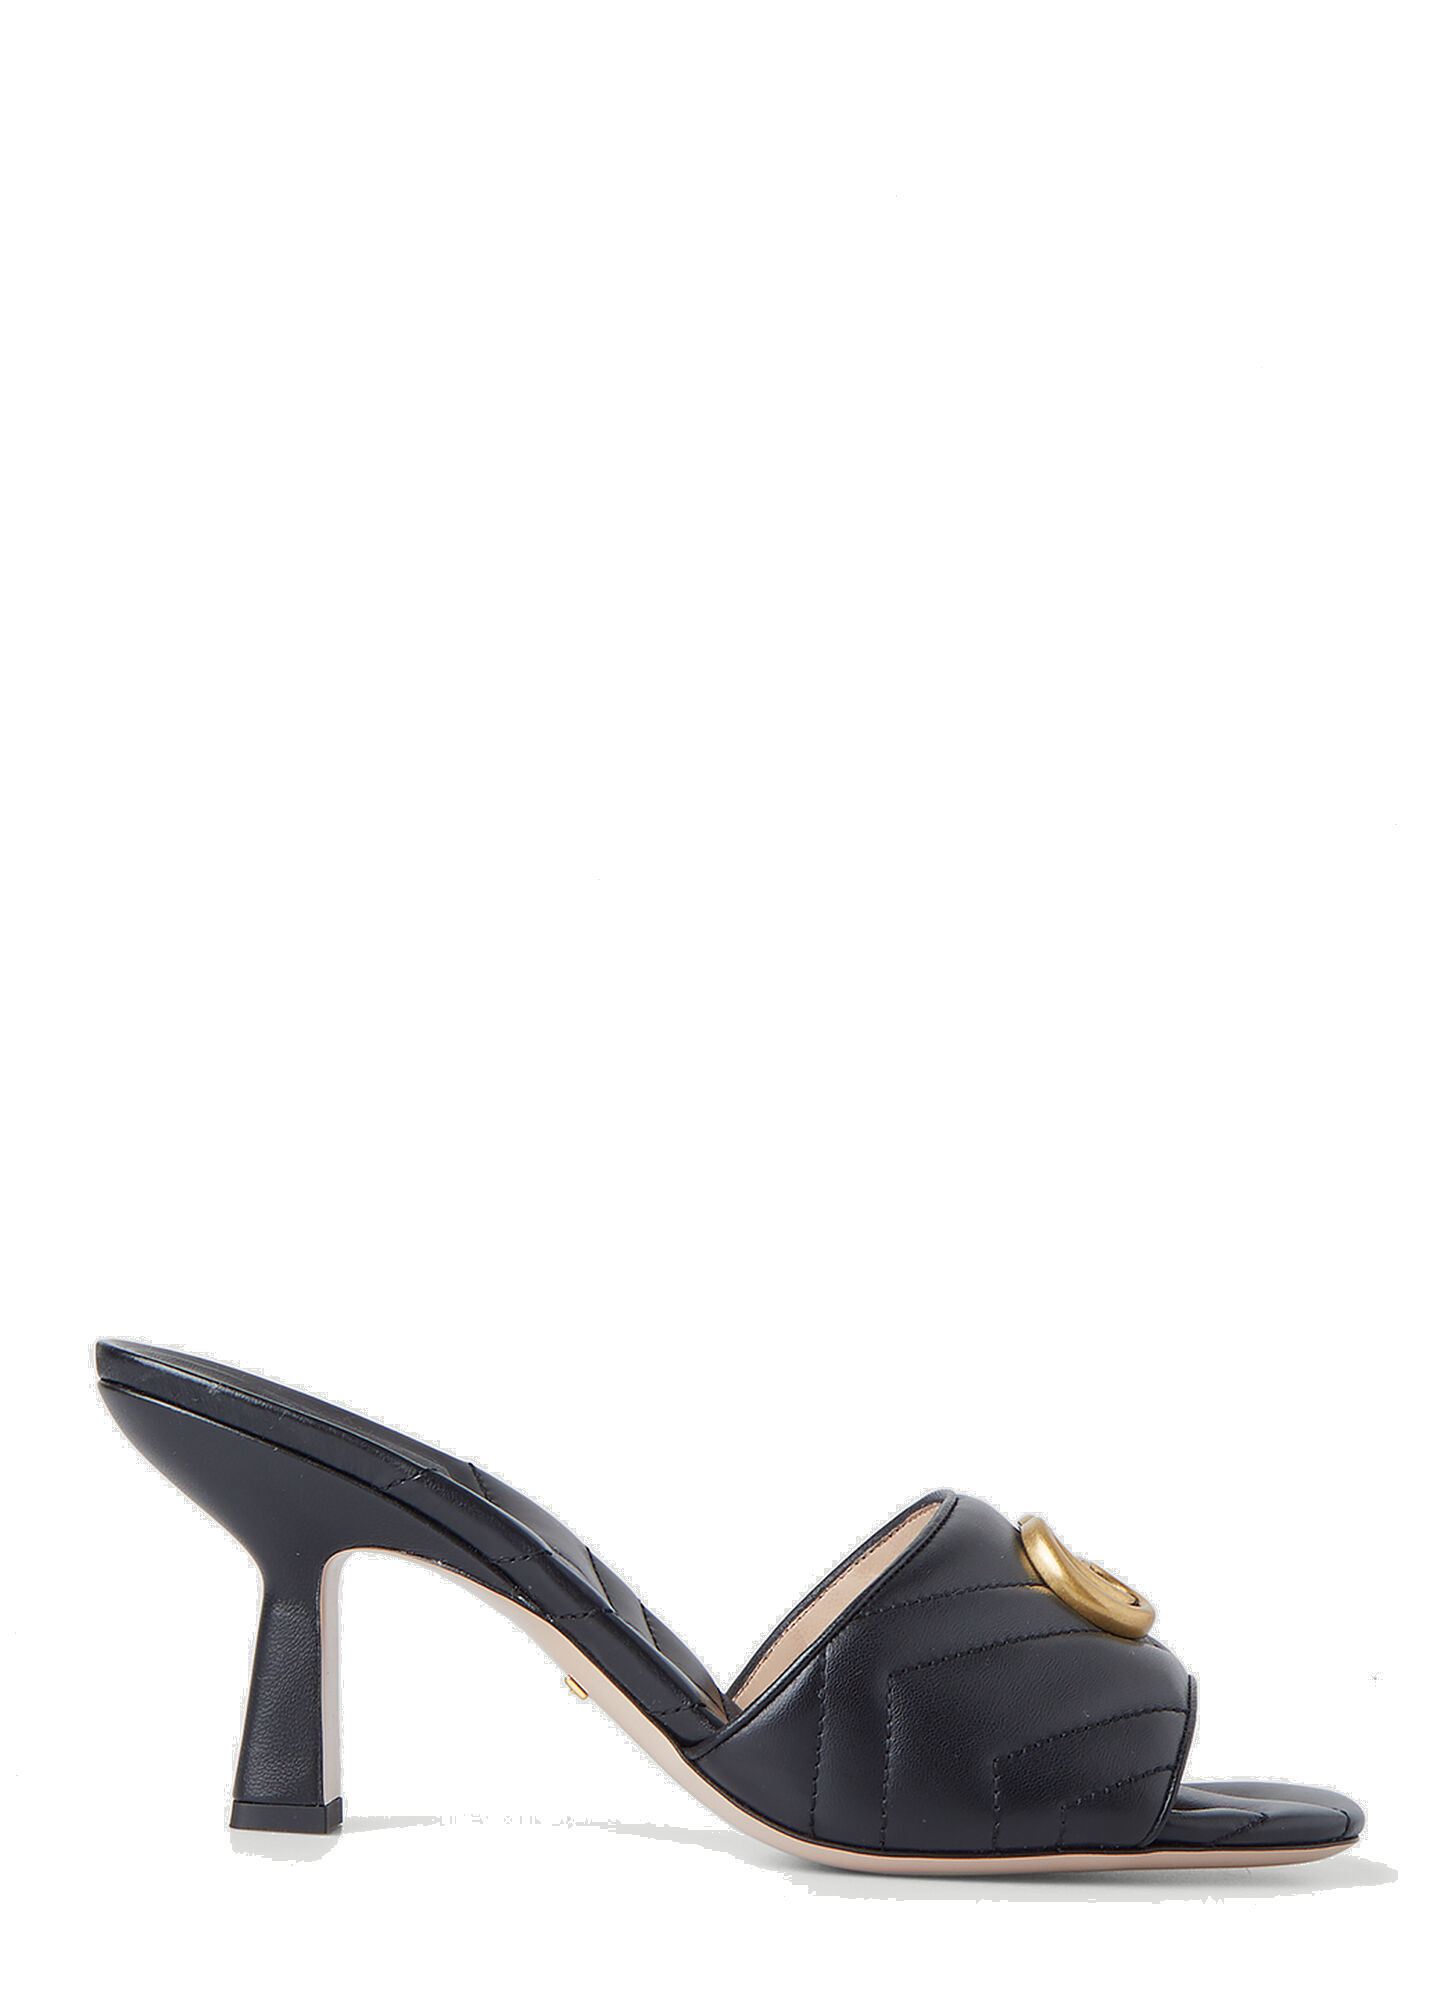 Marmont High Heel Mules in Black Gucci